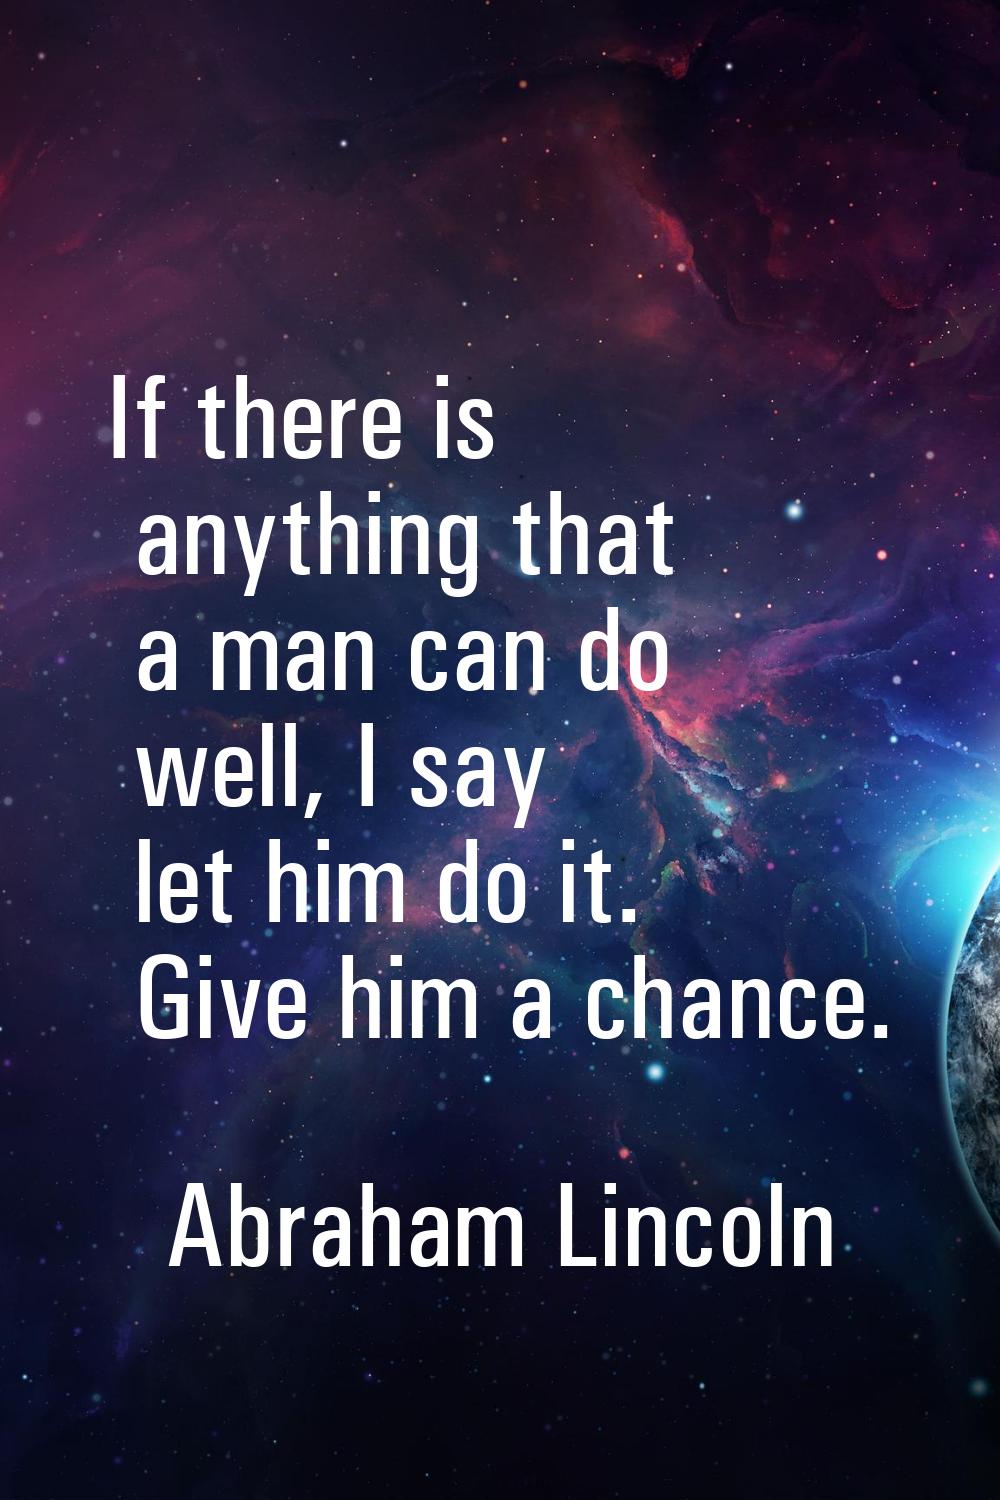 If there is anything that a man can do well, I say let him do it. Give him a chance.